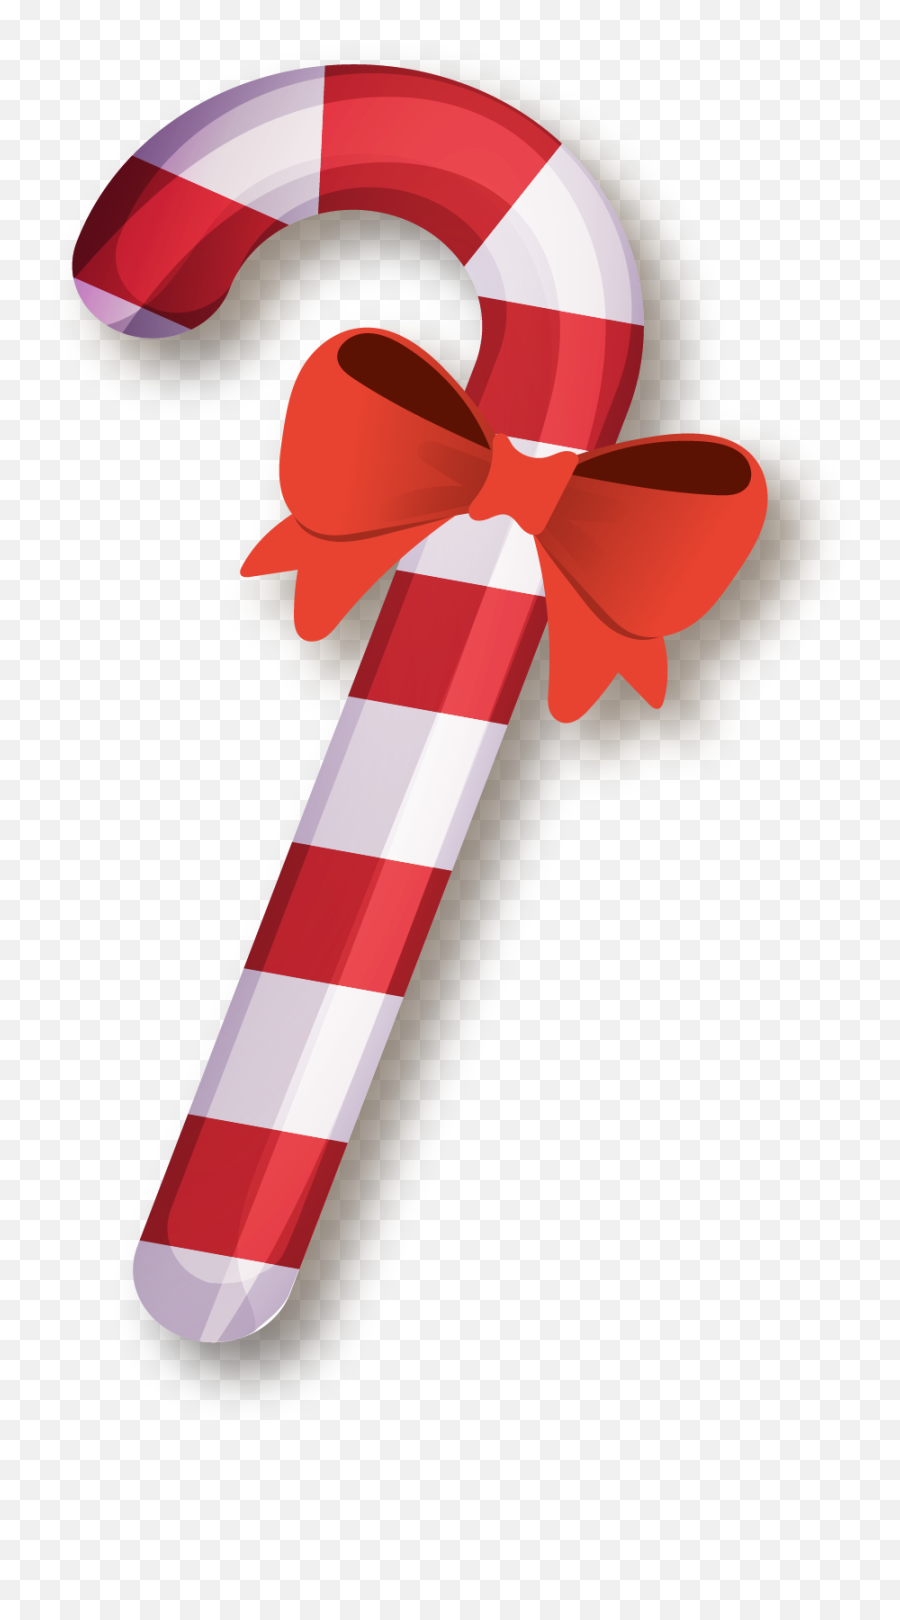 Candy Cane Christmas Sugar - Christmas Candy Cane Vector Png Emoji,Candy Cane Png